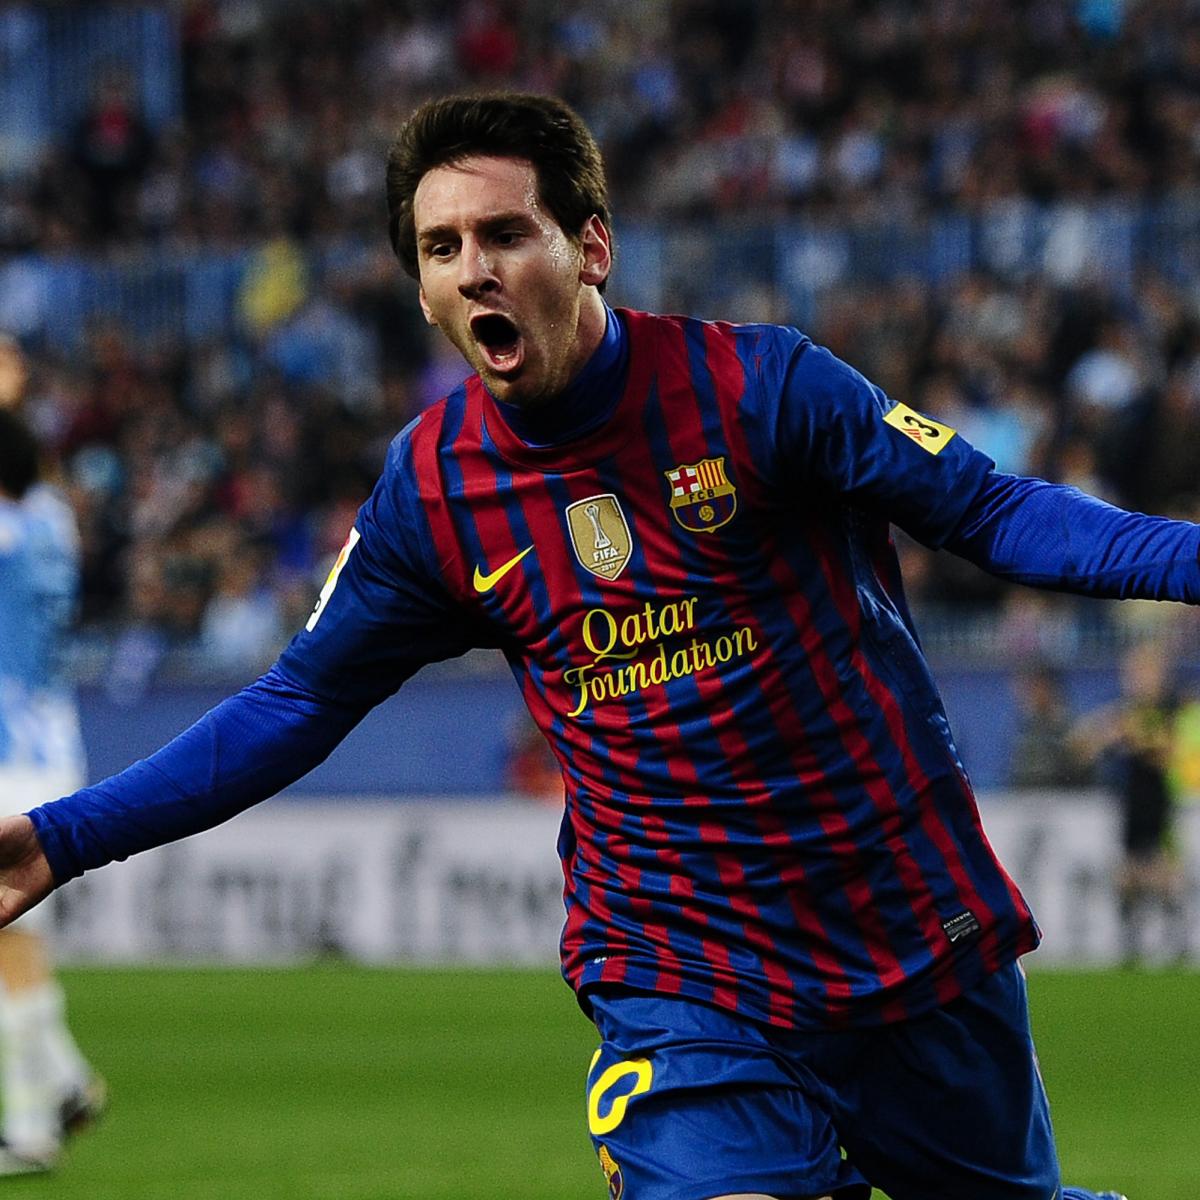 Lionel Messi will be out for revenge! Winners and losers from the